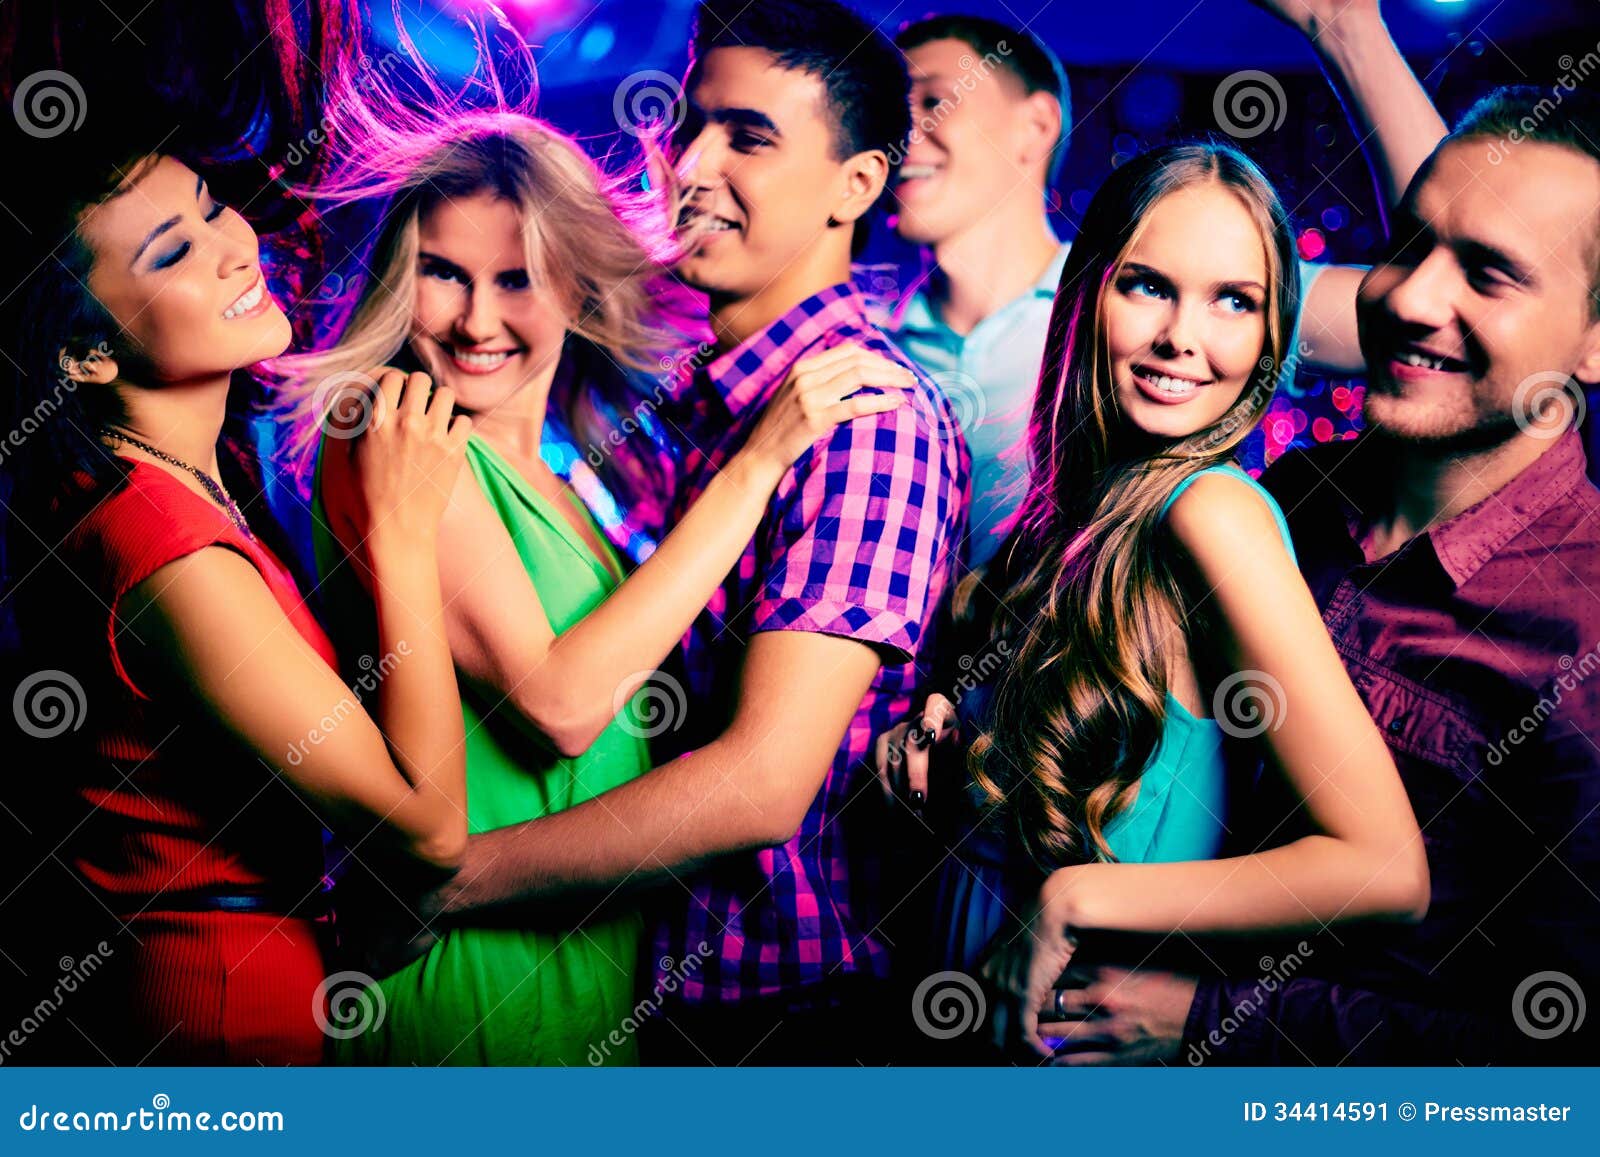 Cool friends stock image. Image of girlfriend, male, dancing - 34414591